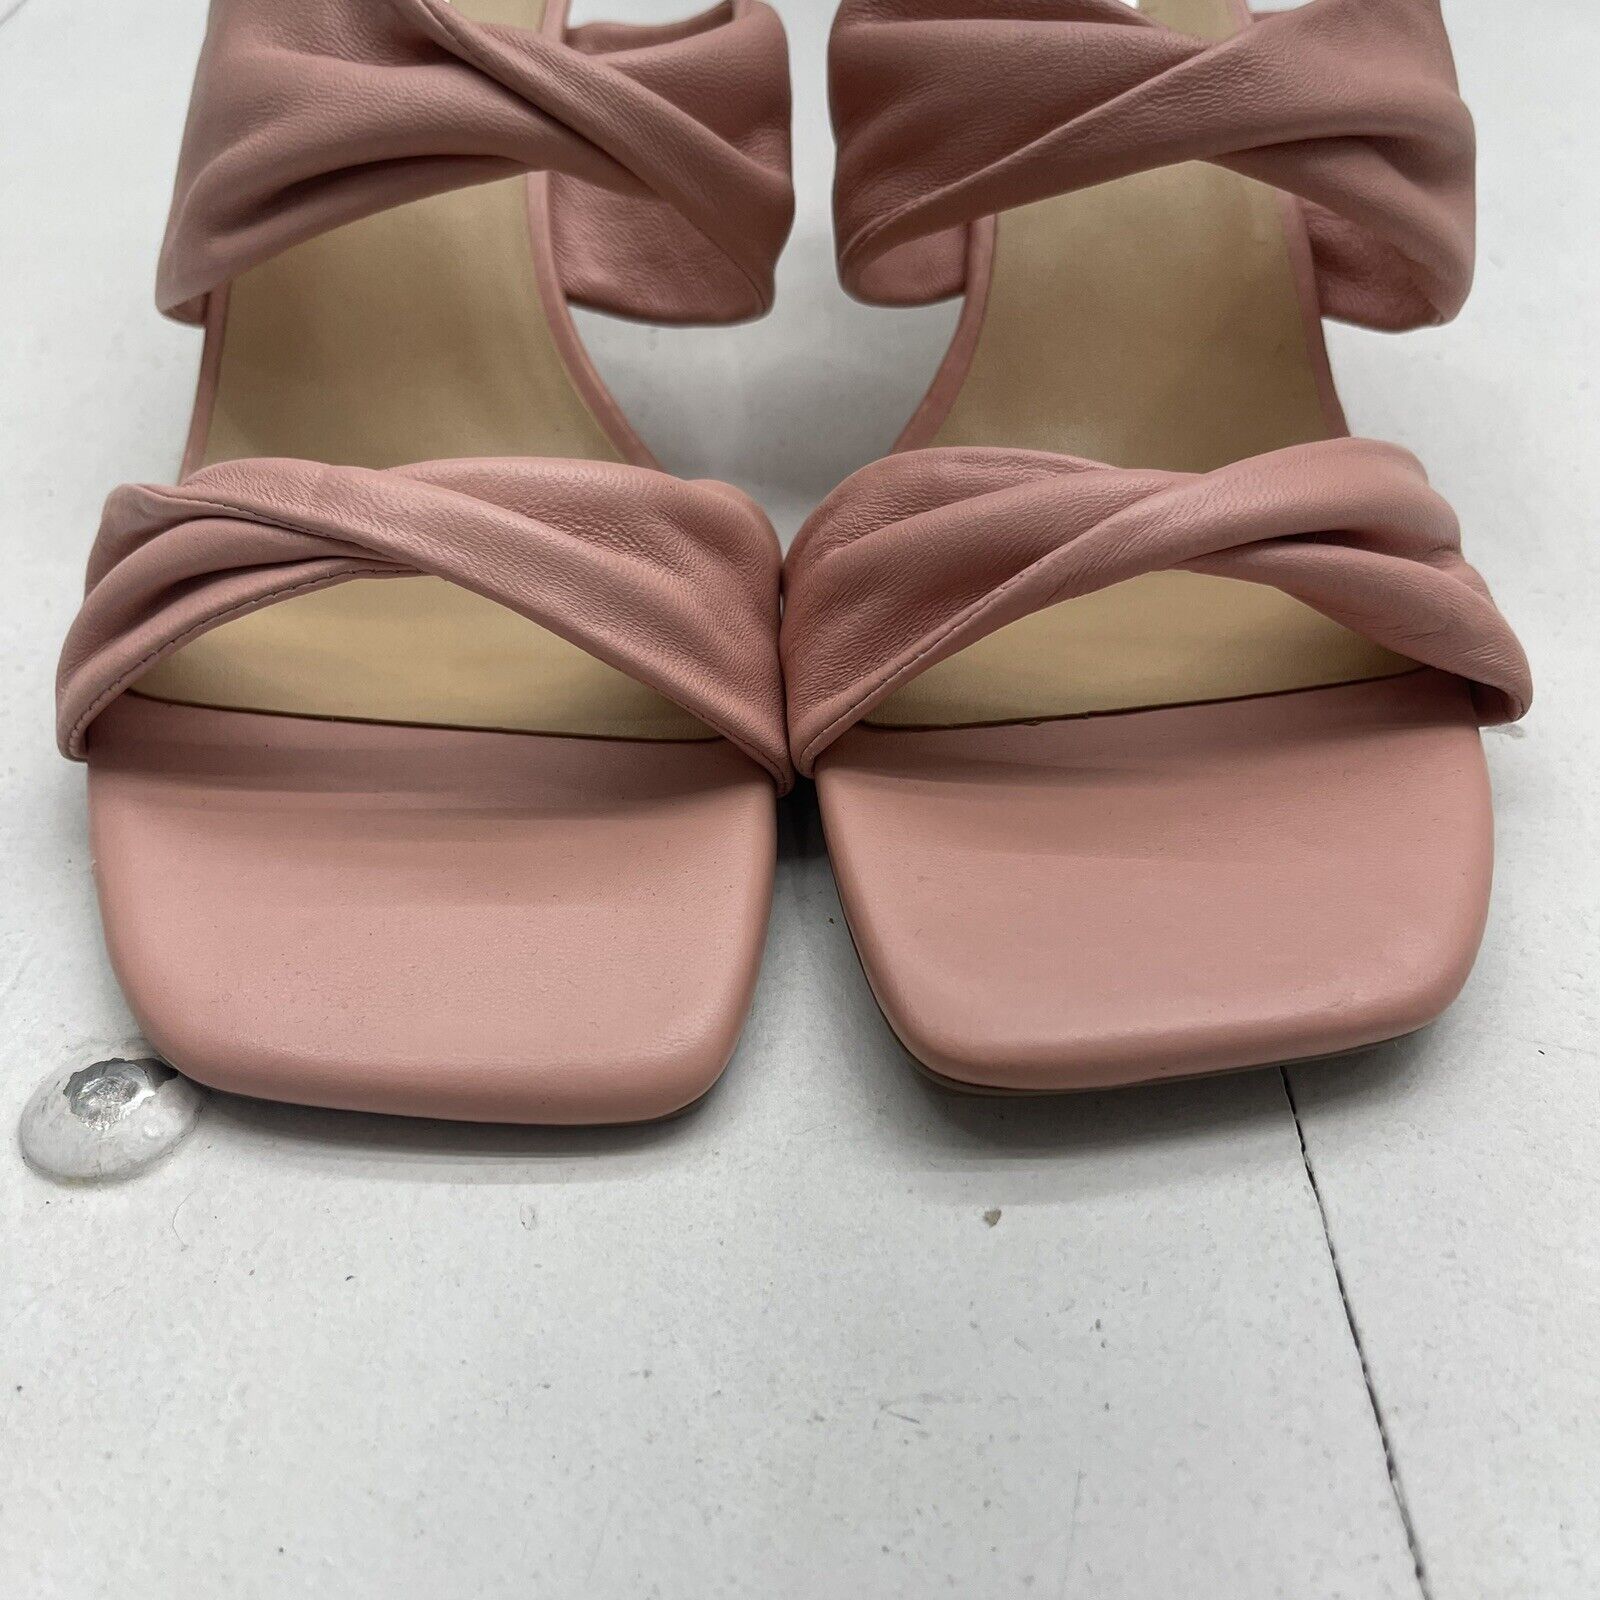 CHRISTIAN SIRIANO FOR PAYLESS SIZE 11 Ladies SHOES – One More Time Family